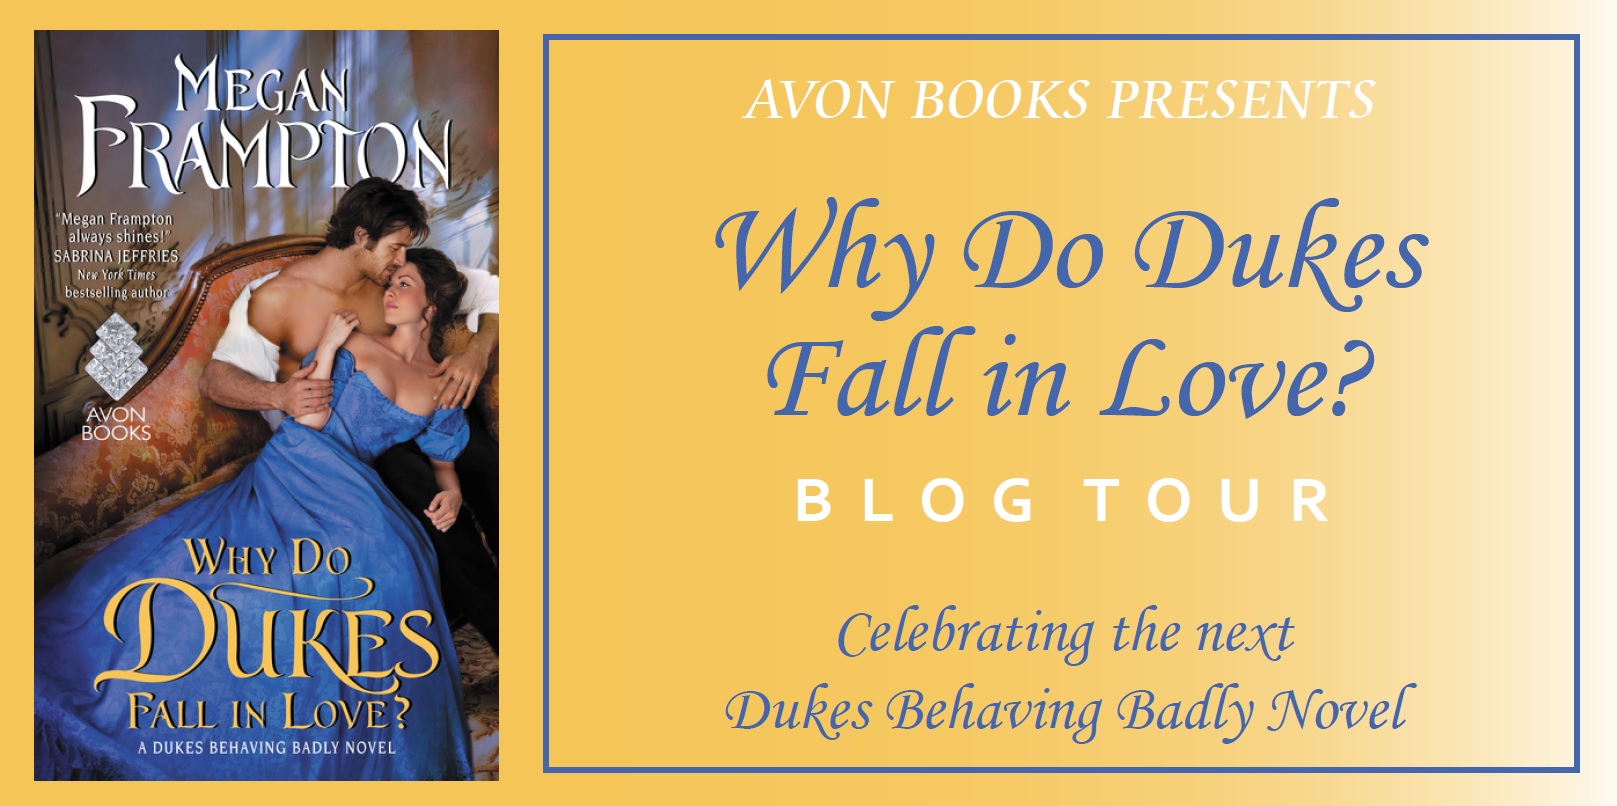 Review and Giveaway: Why Do Dukes Fall in Love? by Megan Frampton.